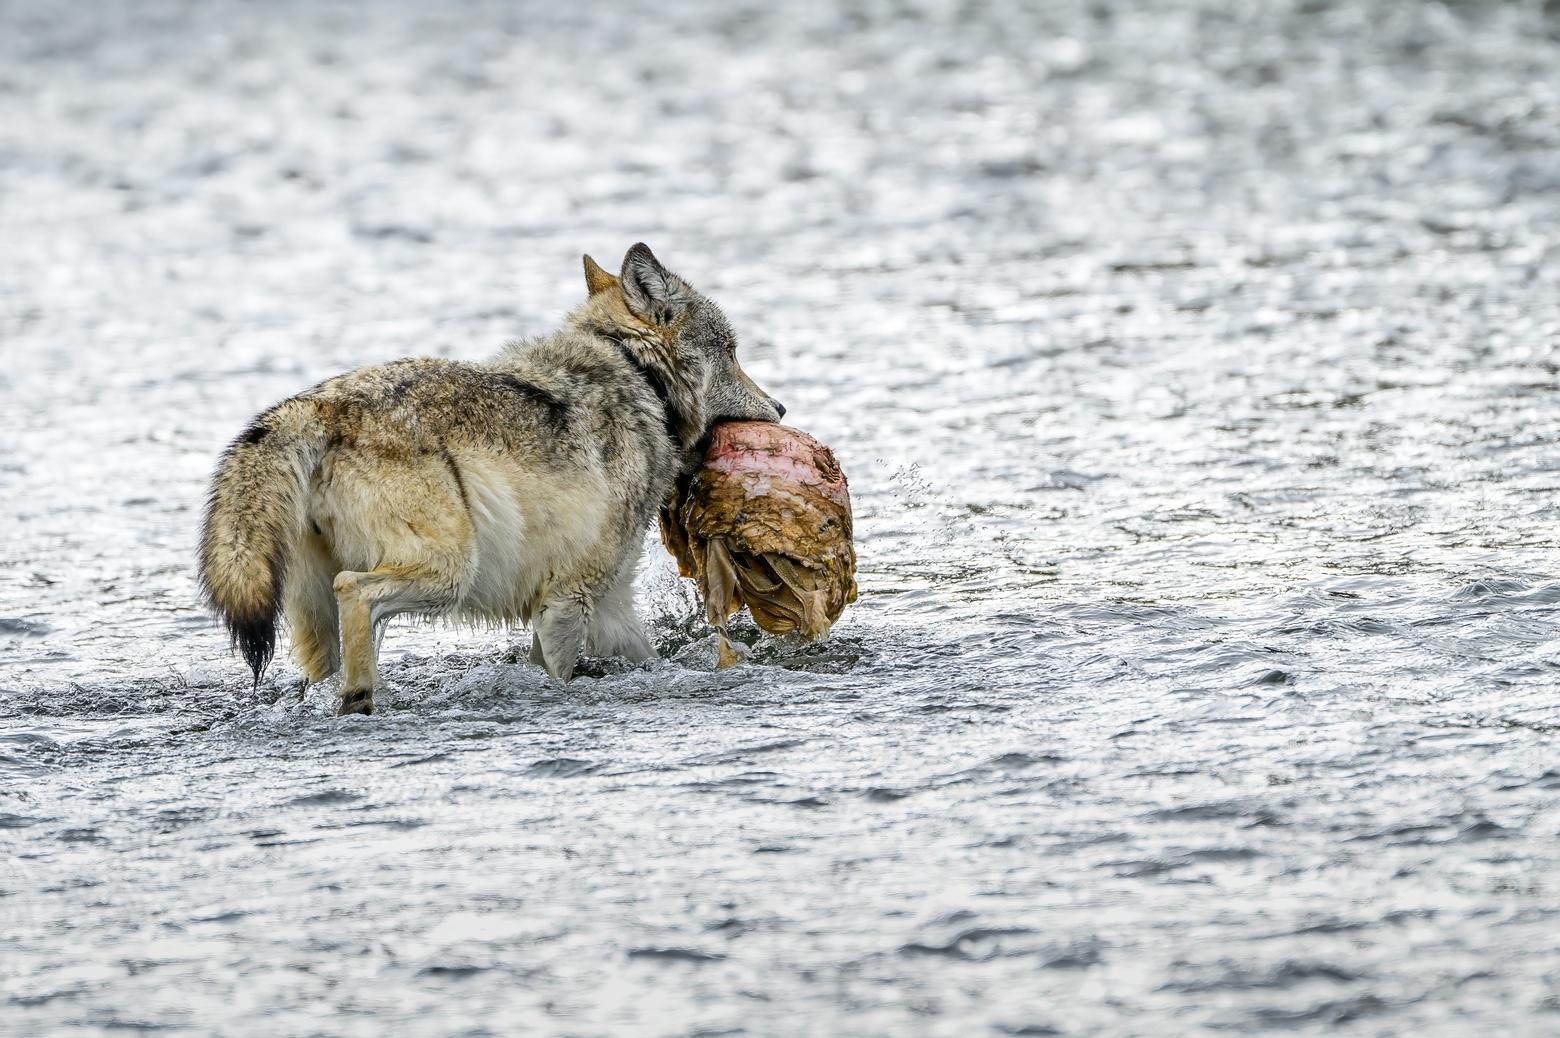 January 21. A portion of the carcass washed a ways down the river. Ravens began eating it when this wolf approached and hauled it back out of the water. 